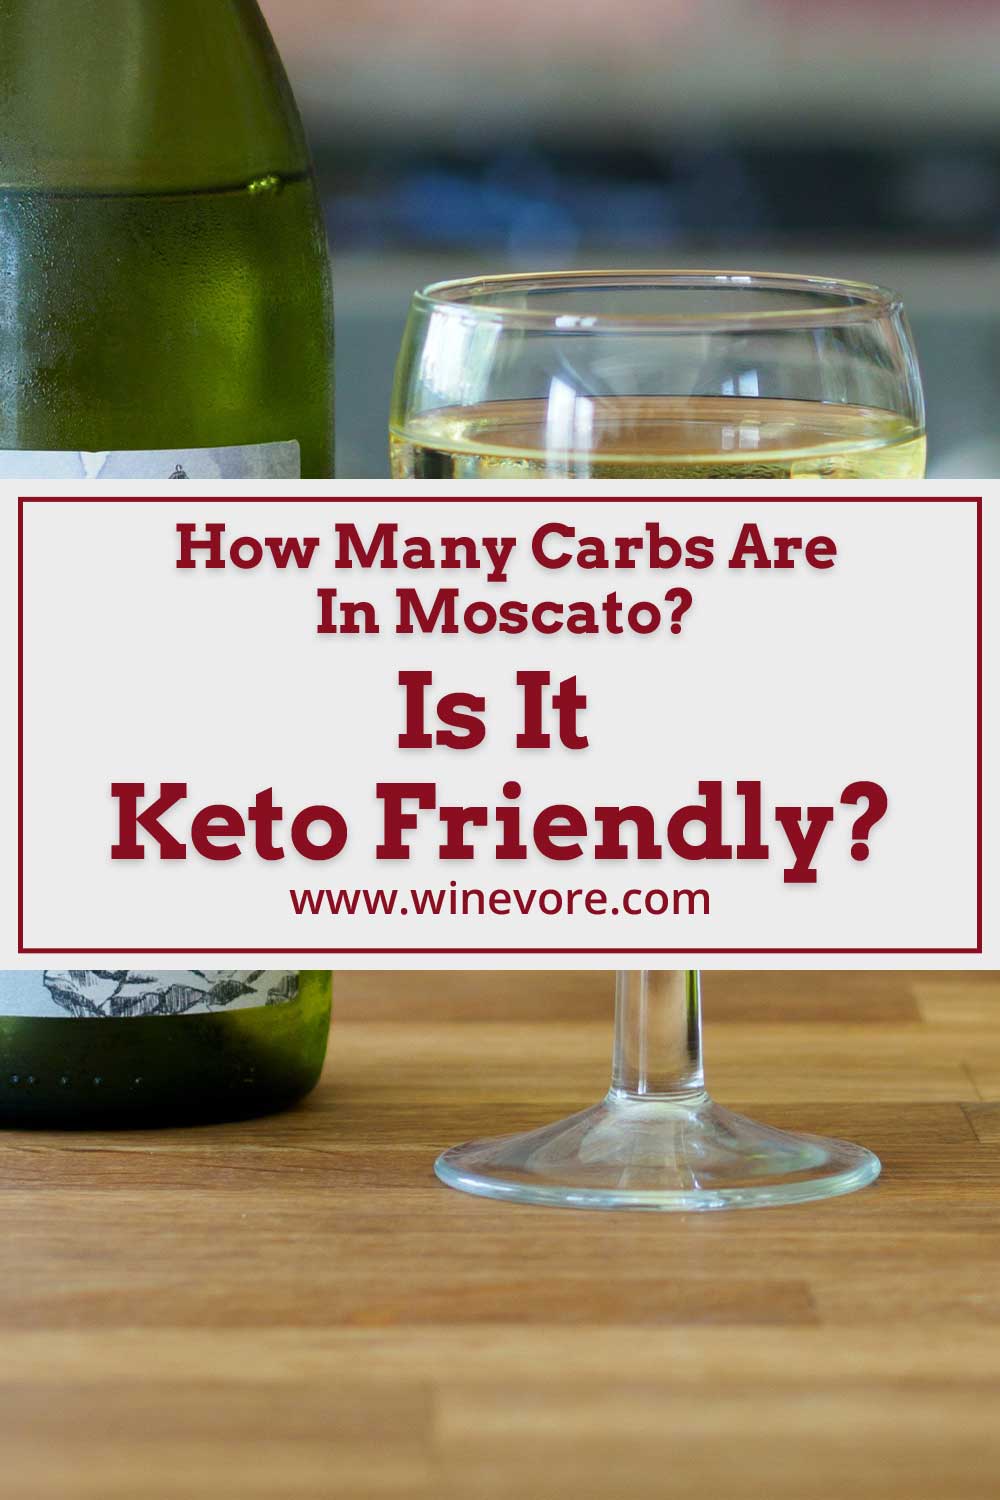 A wine glass and a bottle on a wooden surface - How Many Carbs Are In Moscato?